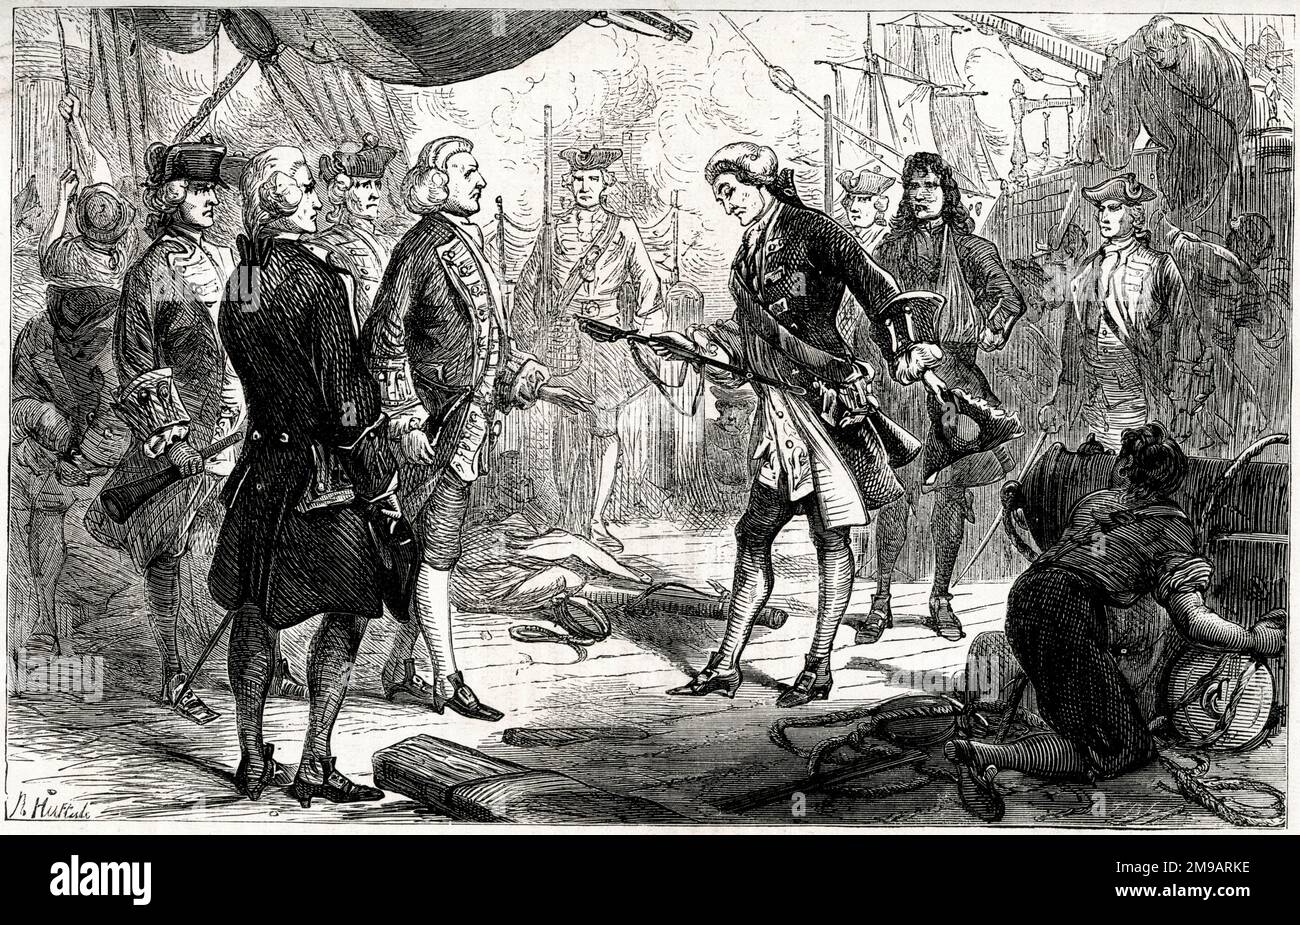 The Chevalier de Saint-George of the ship Invincible surrenders his sword to Admiral Anson after the First Battle of Cape Finisterre between Great Britain and France, 14 May 1747, during the War of the Austrian Succession (1740-1748). Stock Photo